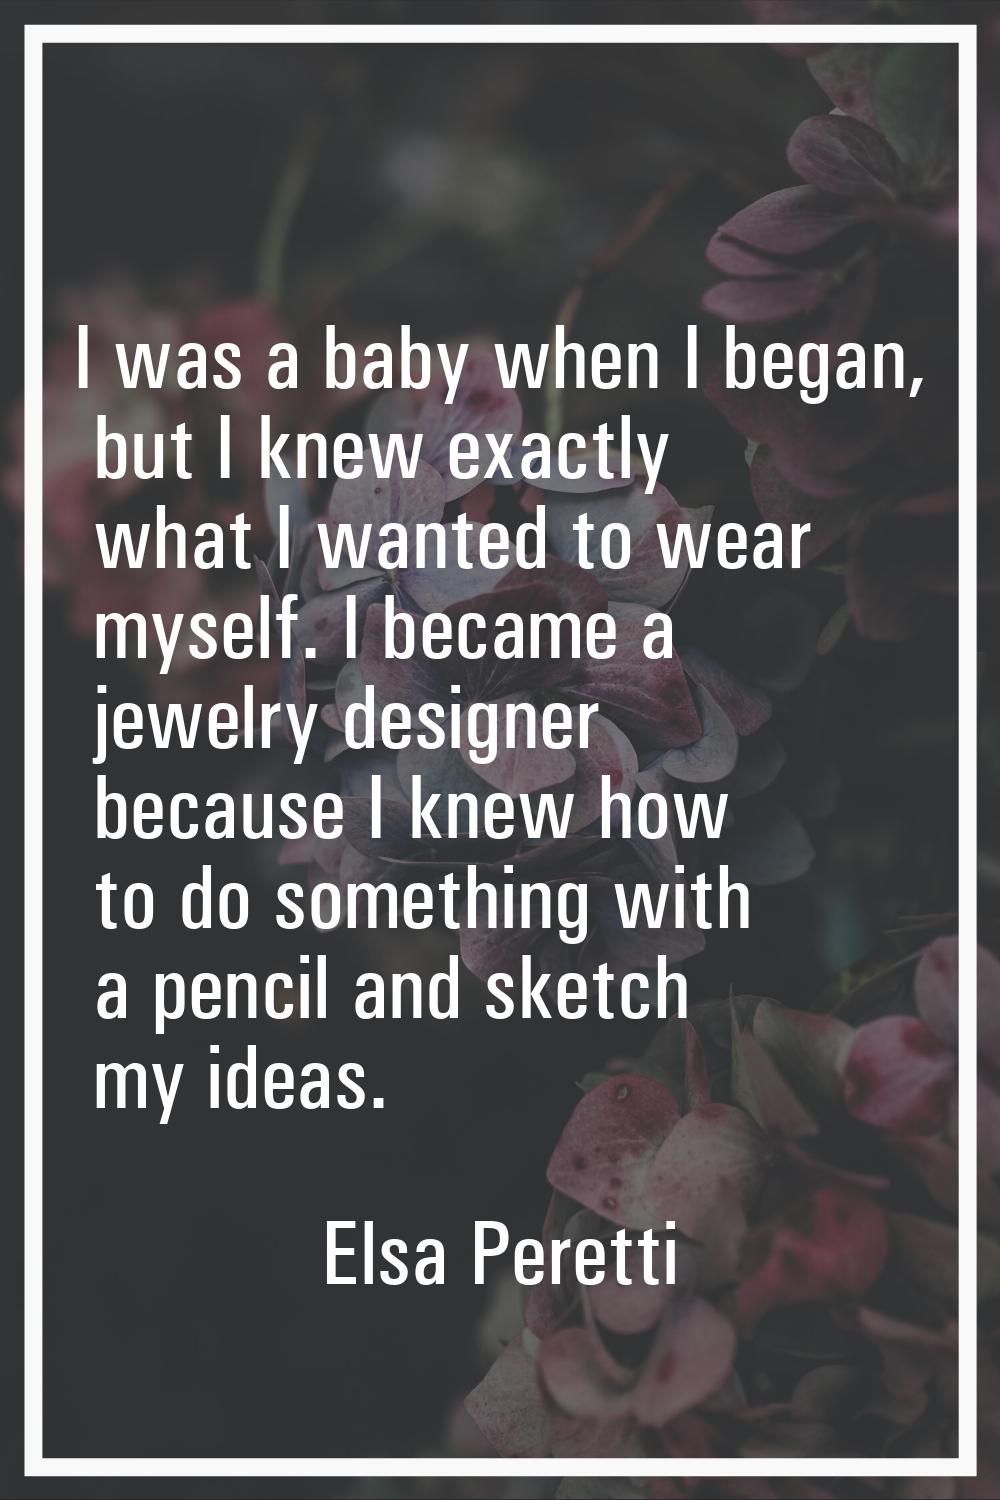 I was a baby when I began, but I knew exactly what I wanted to wear myself. I became a jewelry desi